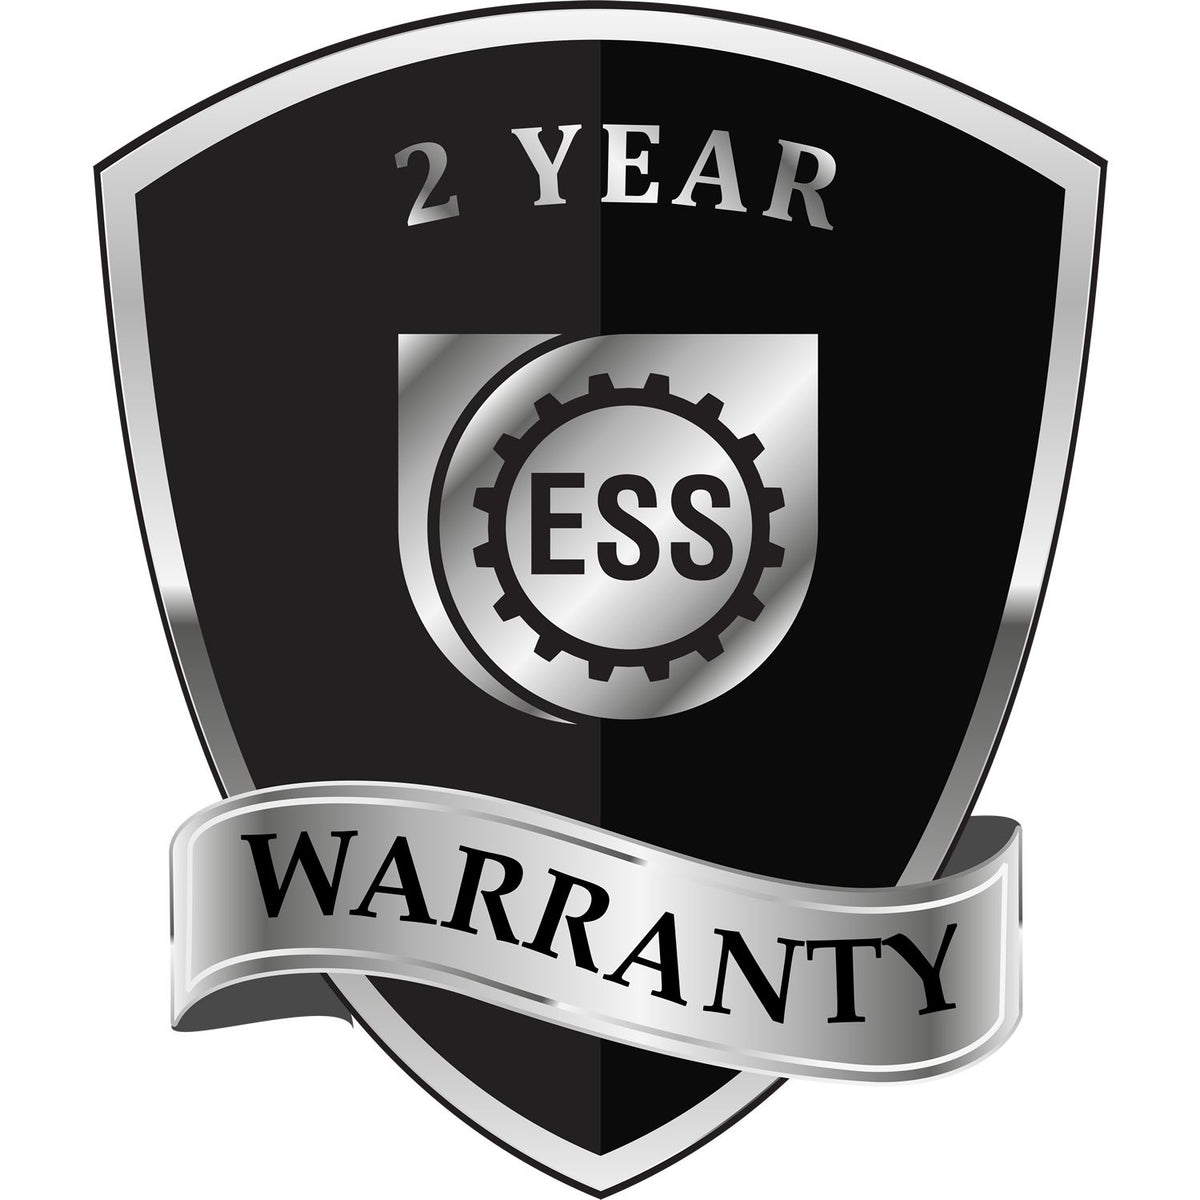 A black and silver badge or emblem showing warranty information for the Gift Alaska Architect Seal